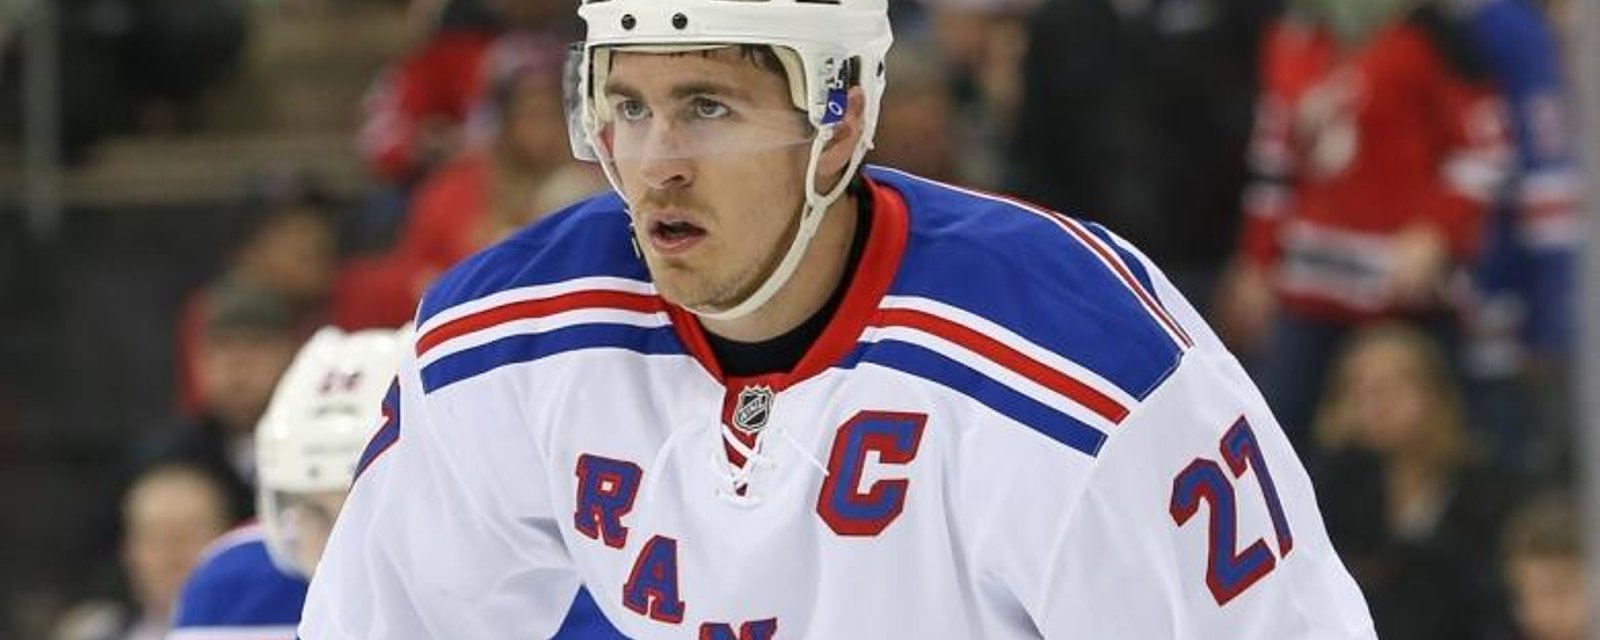 Rangers McDonagh goes down to injury on Monday night.